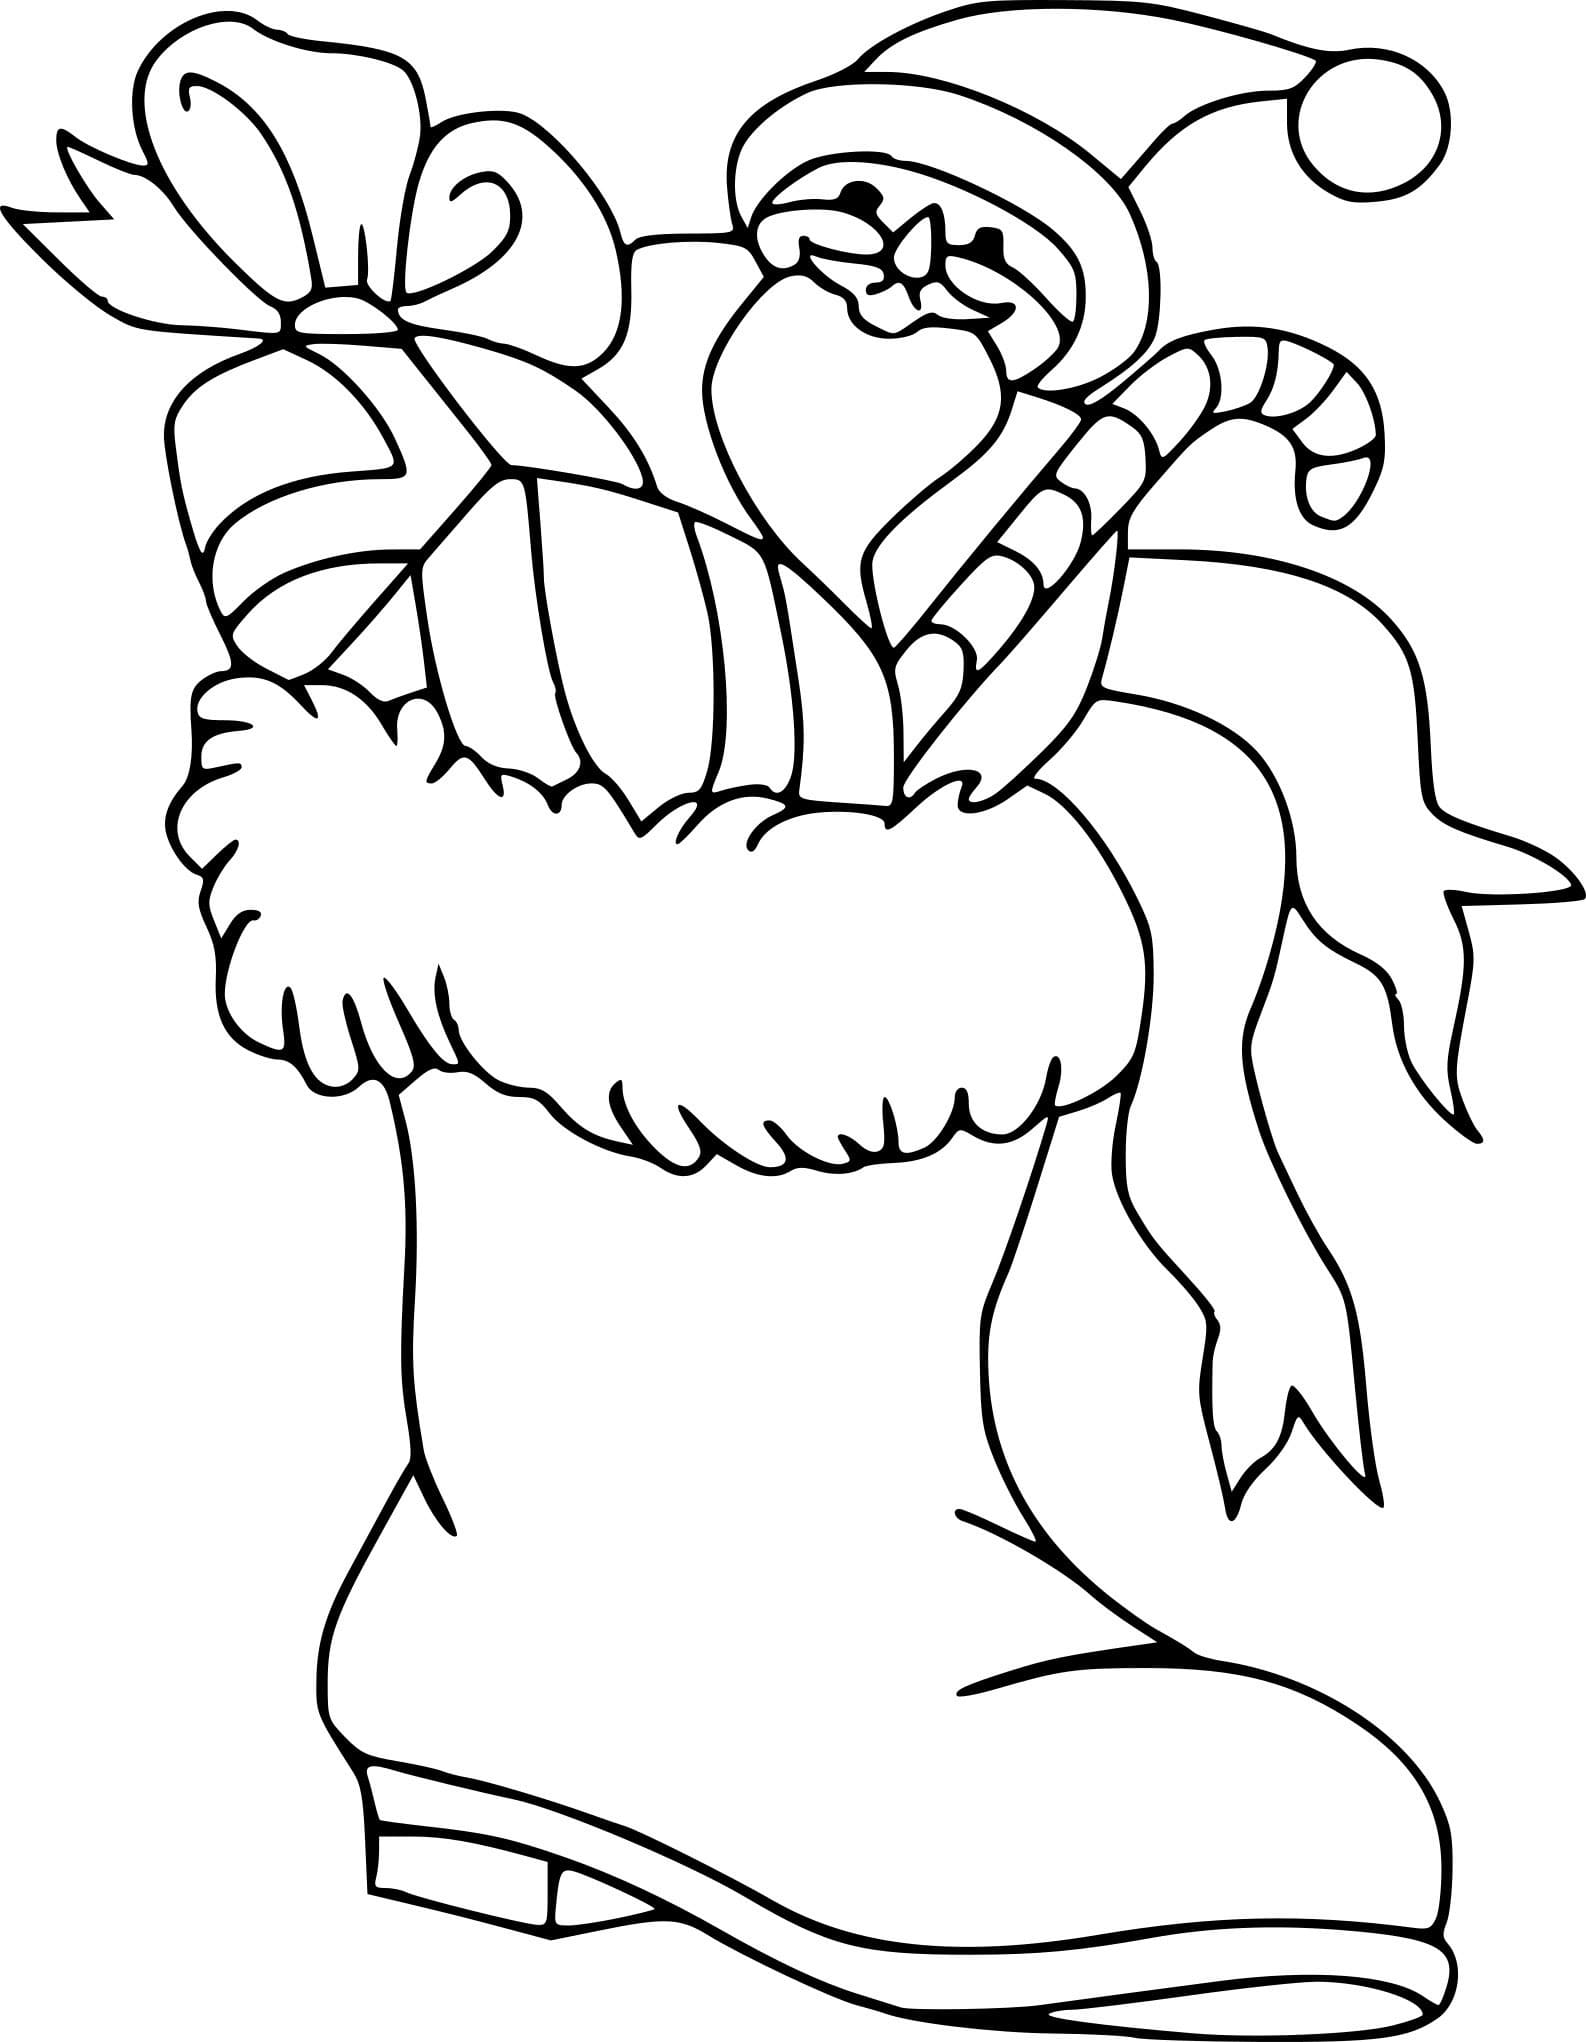 Santa In Christmas Stockings Coloring Page